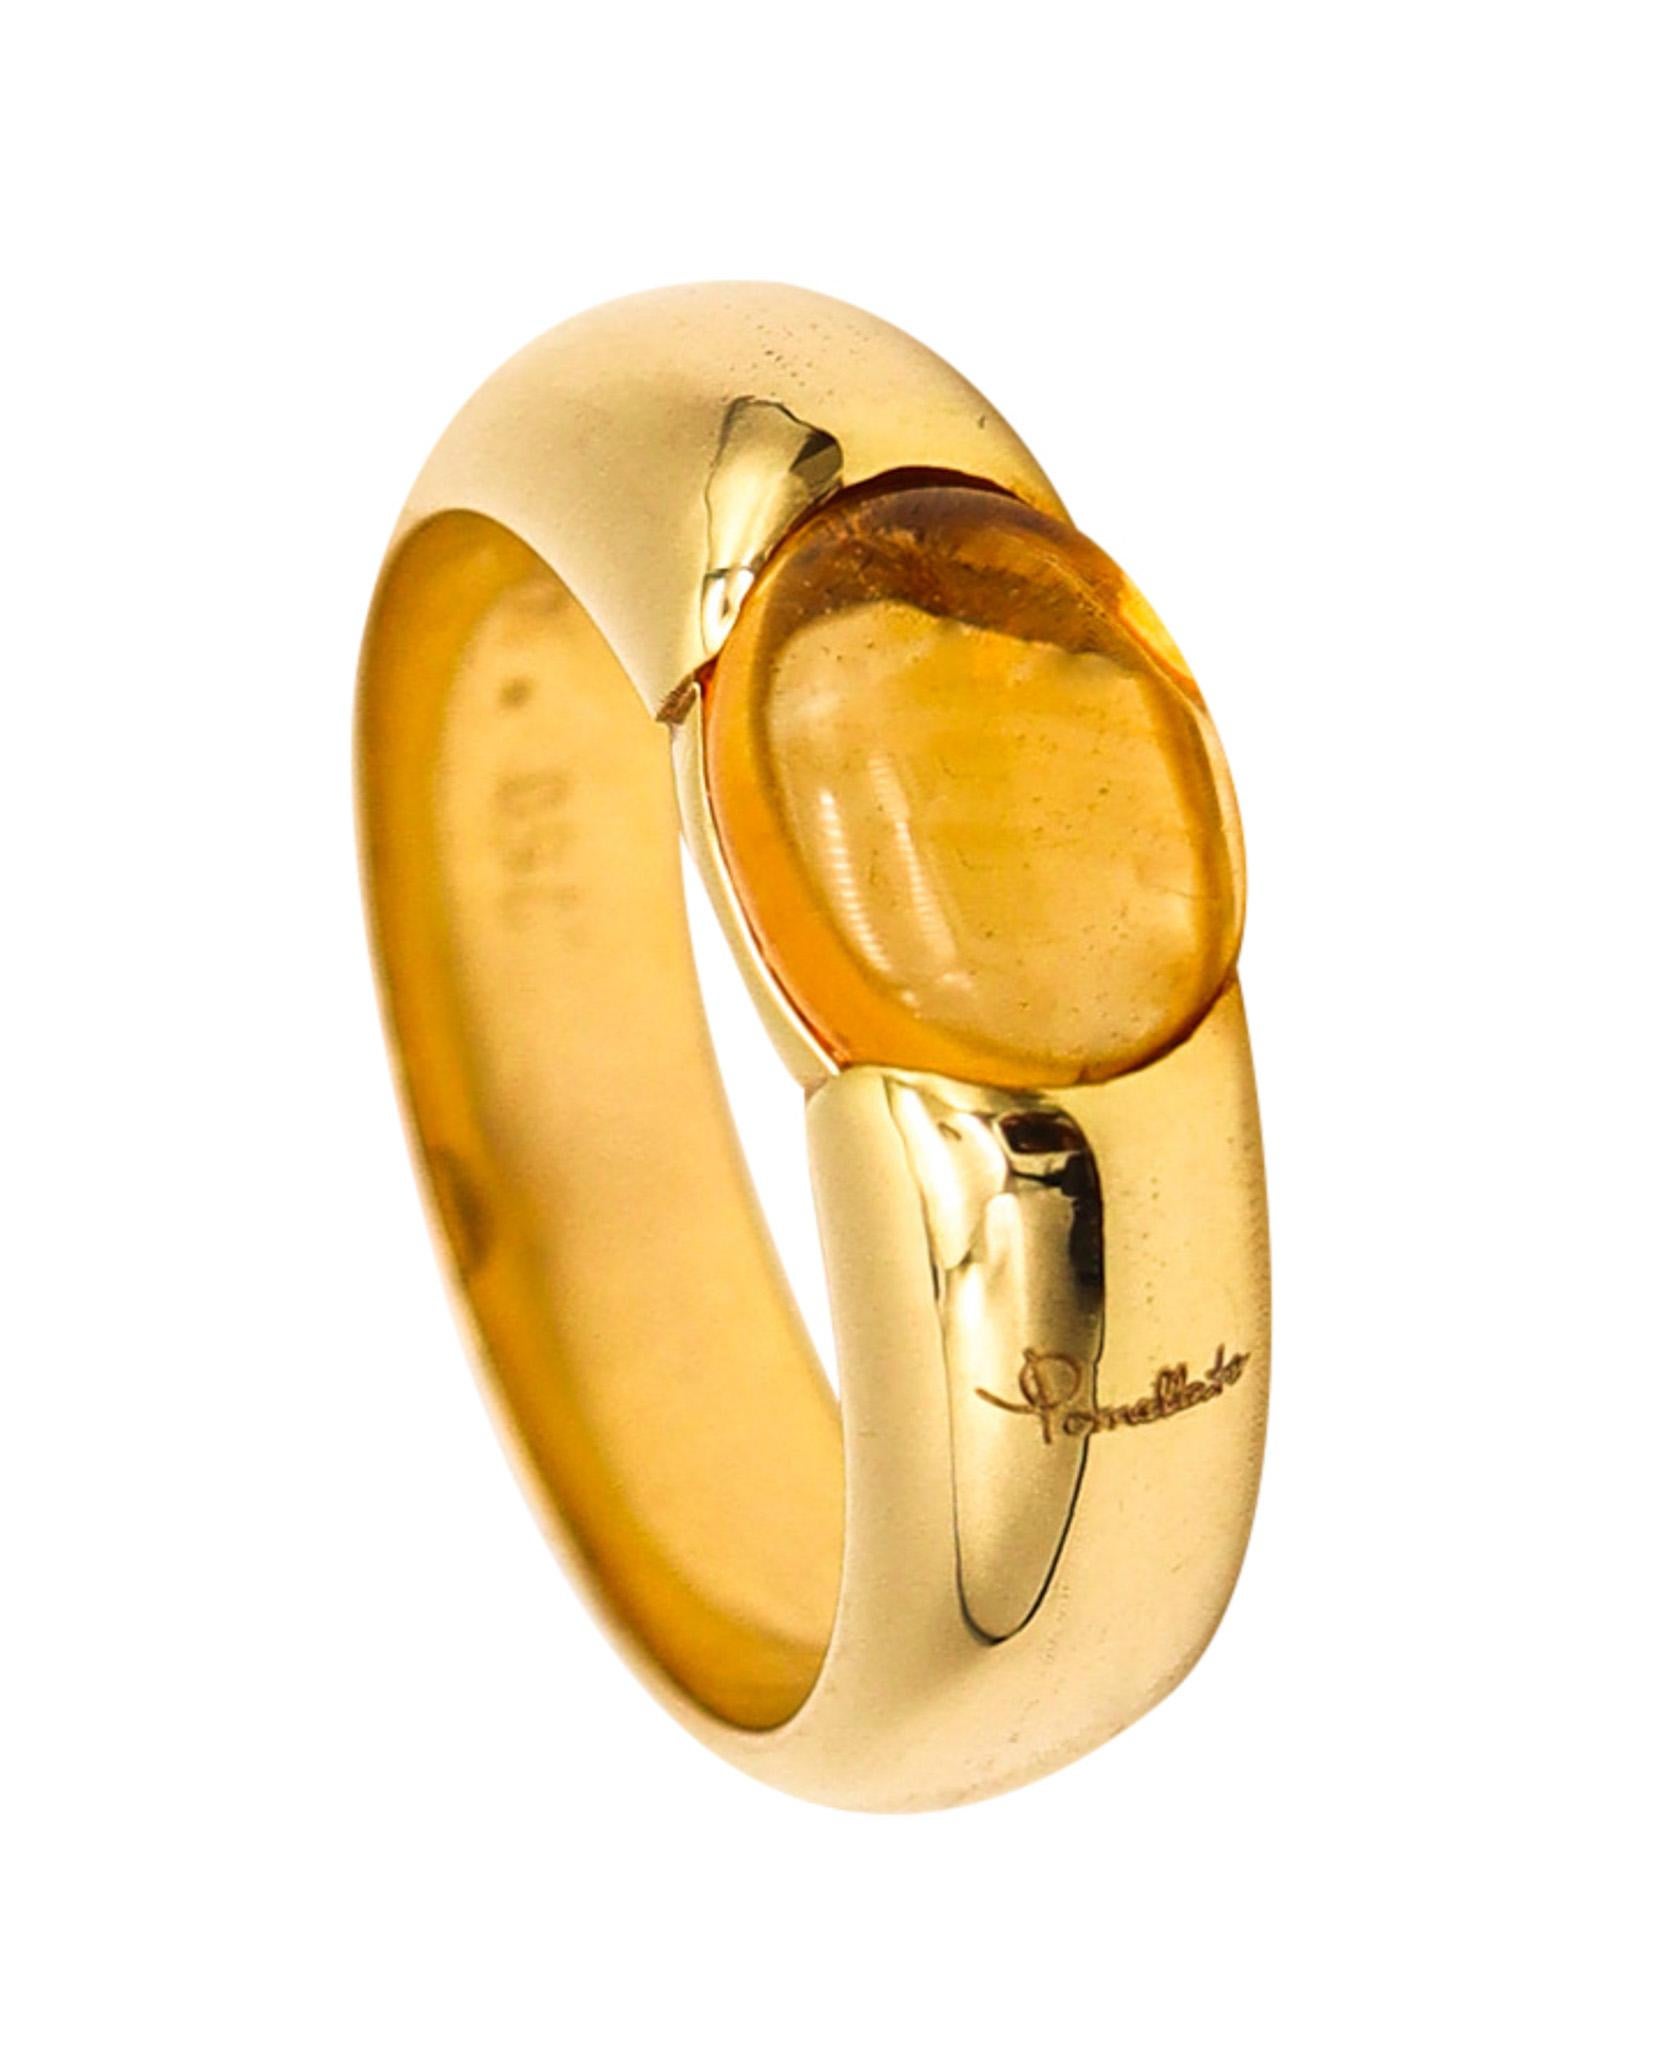 Pomellato Milan Candy Ring In 18Kt Yellow Gold With 4.75 Cts Orange Citrine For Sale